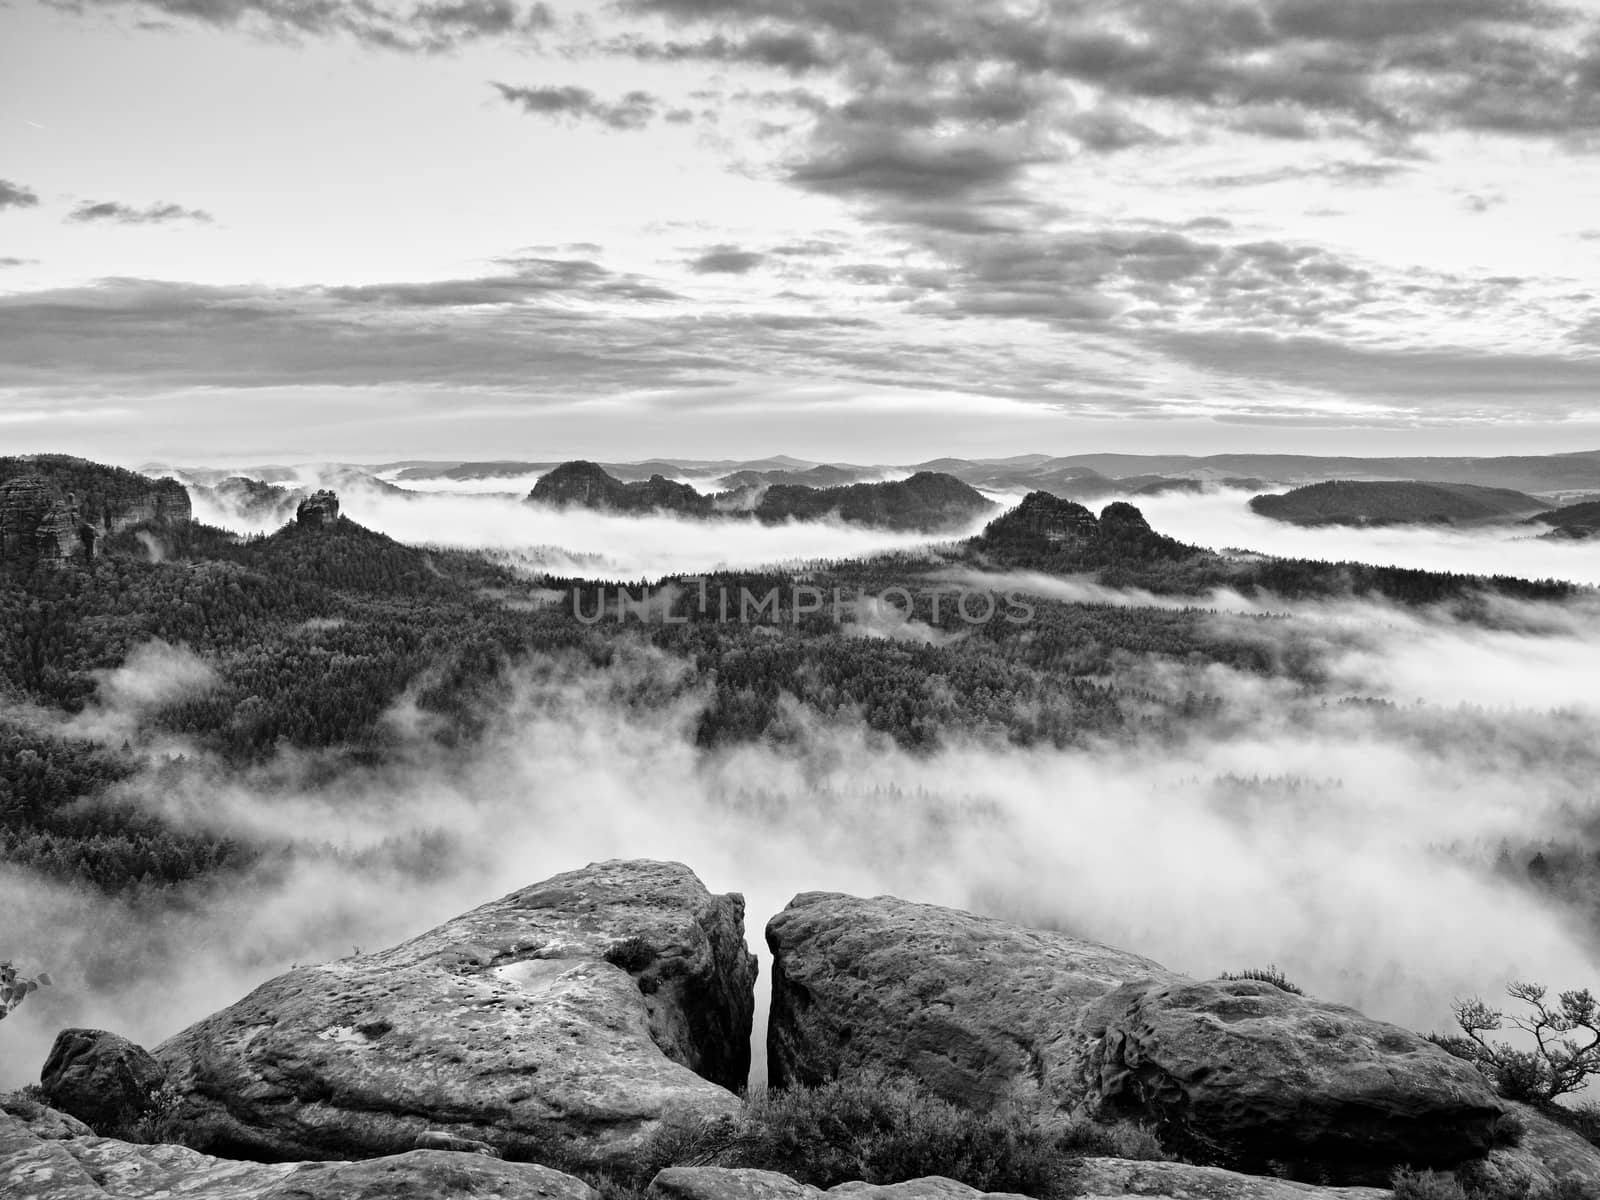 Misty morning after heavy rain. View into long deep valley full of fresh spring mist. Fall landscape within daybreak after rainy night. Black and white photo